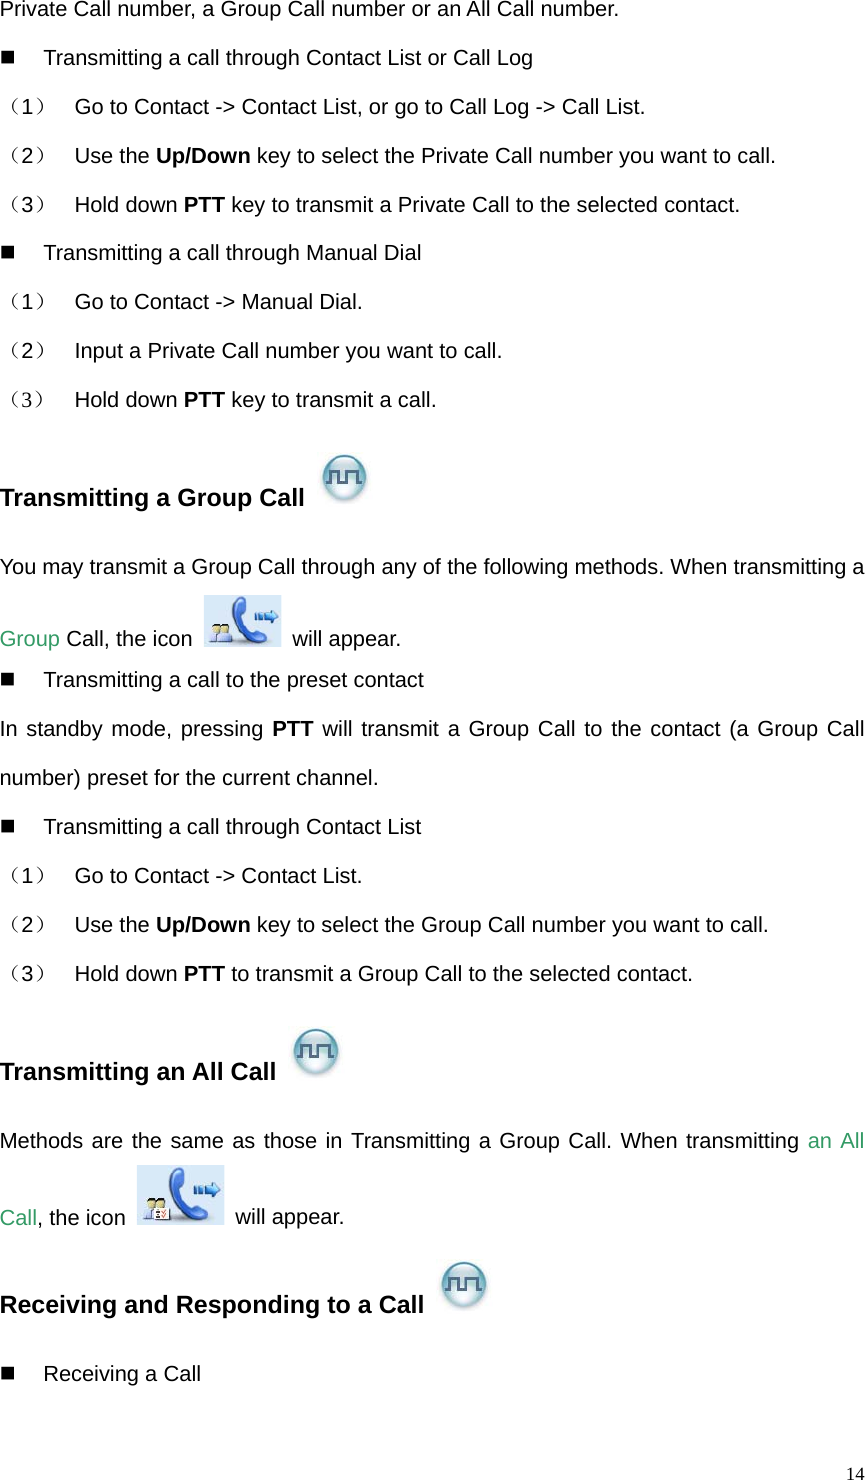   14Private Call number, a Group Call number or an All Call number.     Transmitting a call through Contact List or Call Log （1）  Go to Contact -&gt; Contact List, or go to Call Log -&gt; Call List. （2）  Use the Up/Down key to select the Private Call number you want to call. （3）  Hold down PTT key to transmit a Private Call to the selected contact.   Transmitting a call through Manual Dial   （1）  Go to Contact -&gt; Manual Dial.   （2）  Input a Private Call number you want to call. （3）  Hold down PTT key to transmit a call.   Transmitting a Group Call   You may transmit a Group Call through any of the following methods. When transmitting a Group Call, the icon   will appear.   Transmitting a call to the preset contact In standby mode, pressing PTT will transmit a Group Call to the contact (a Group Call number) preset for the current channel.     Transmitting a call through Contact List （1）  Go to Contact -&gt; Contact List.   （2）  Use the Up/Down key to select the Group Call number you want to call. （3）  Hold down PTT to transmit a Group Call to the selected contact. Transmitting an All Call   Methods are the same as those in Transmitting a Group Call. When transmitting an All Call, the icon   will appear. Receiving and Responding to a Call   Receiving a Call  